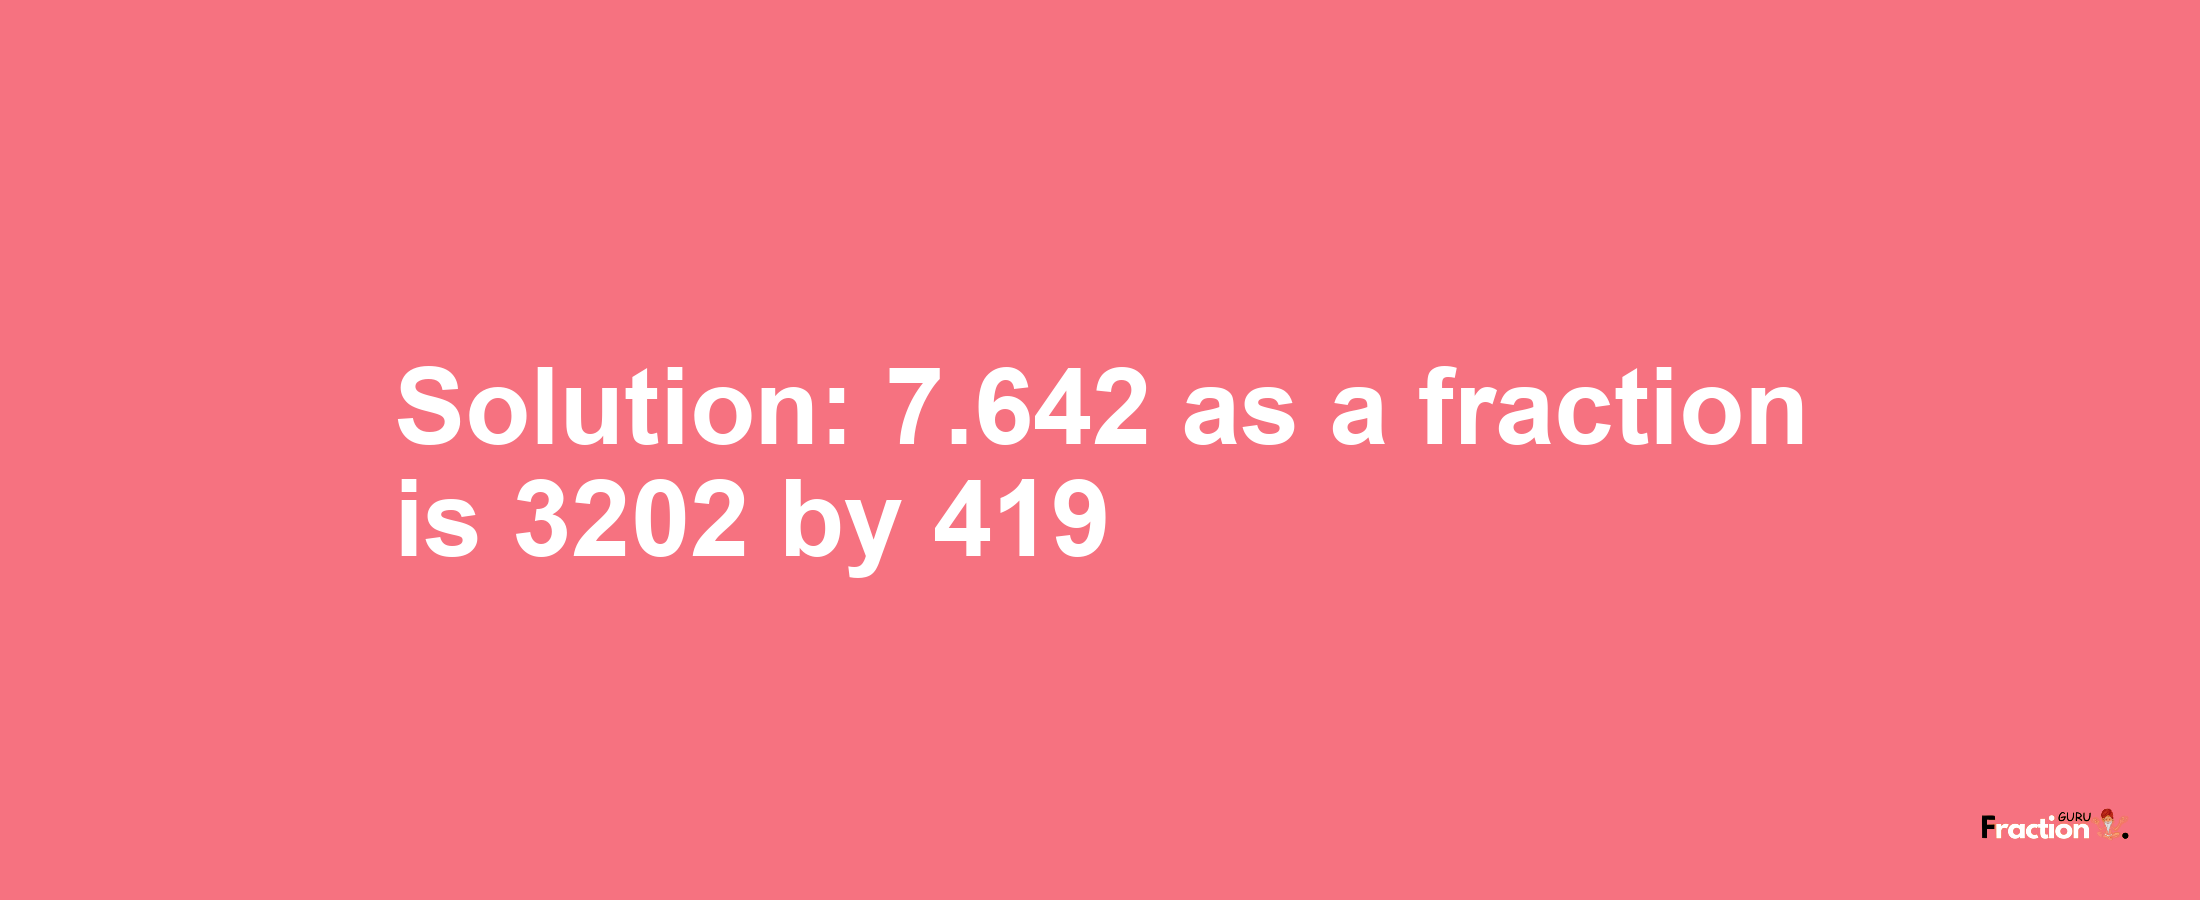 Solution:7.642 as a fraction is 3202/419